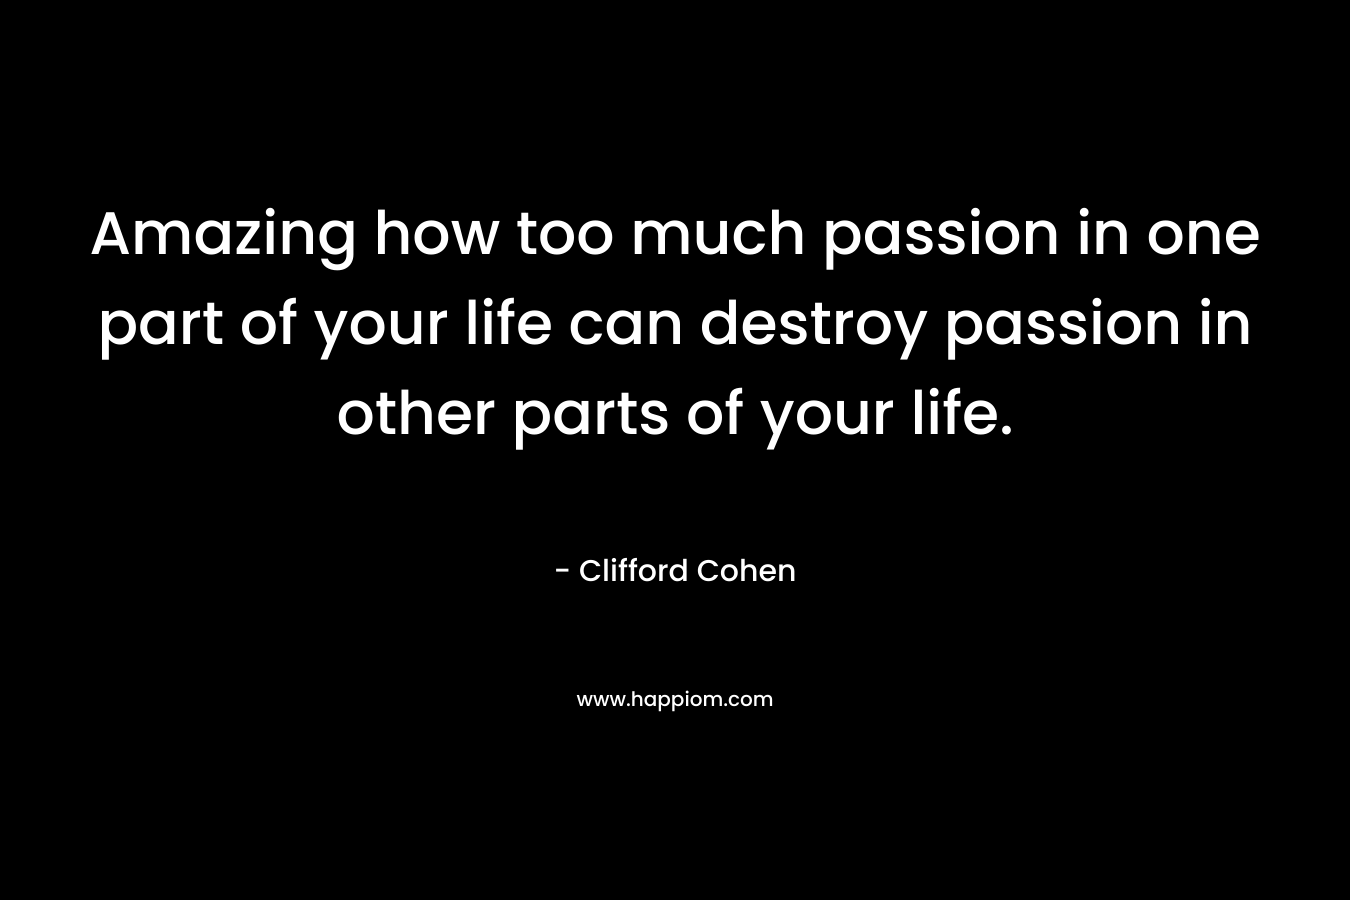 Amazing how too much passion in one part of your life can destroy passion in other parts of your life. – Clifford Cohen